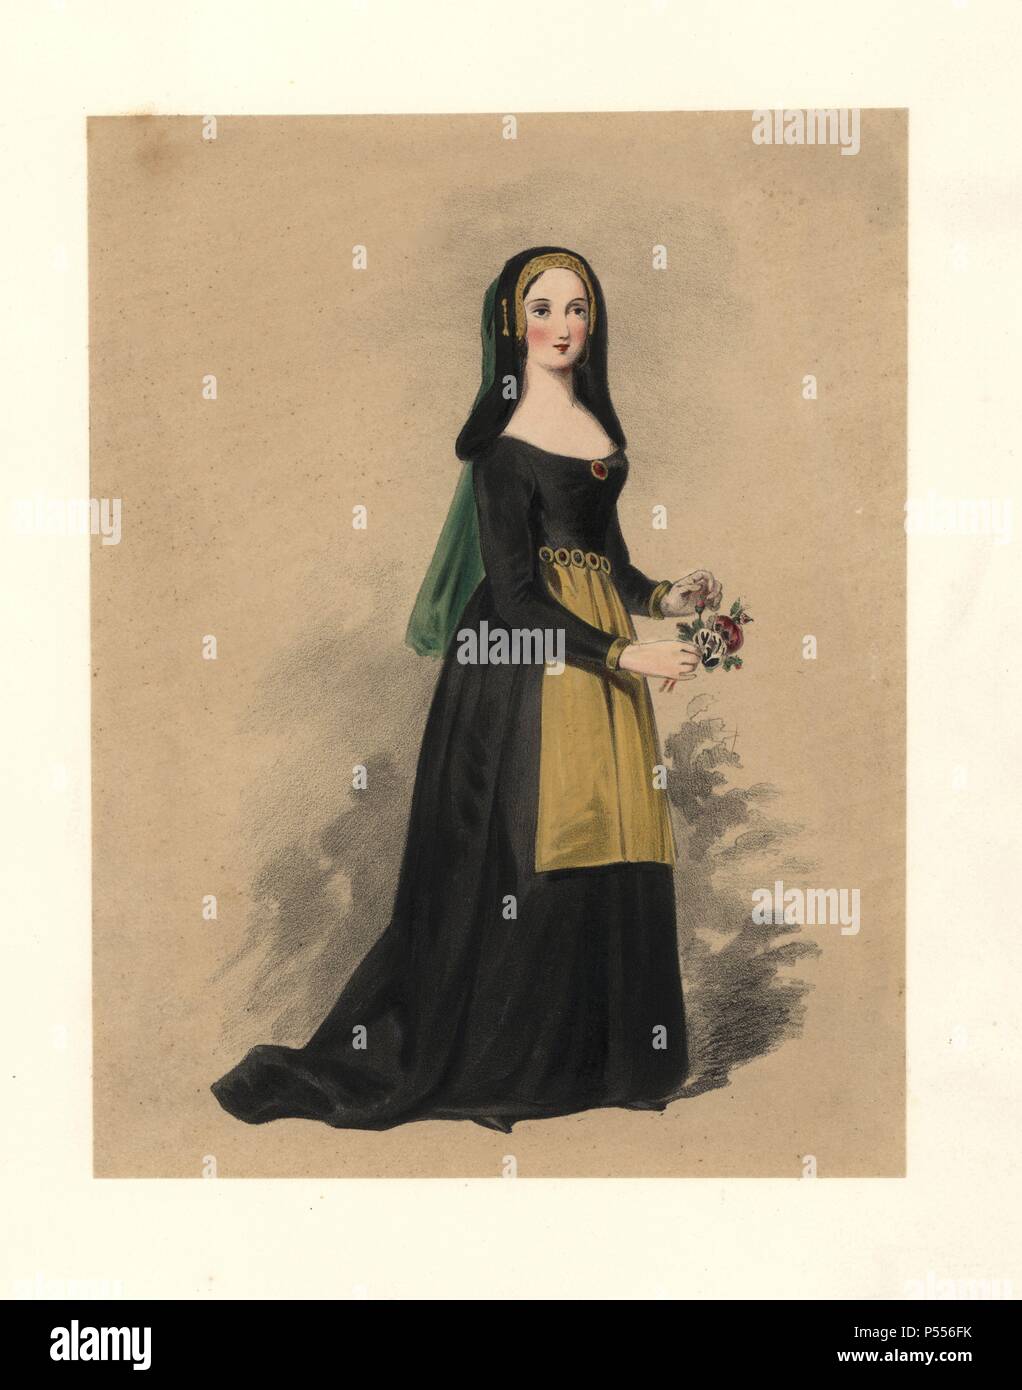 Dress of the reign of King Henry VII, 14851509. She wears a black dress with gold apron, and a black hood with green veil. The ornament which fastens the hood, the clog or clock, is mentioned in the Ordinance issued by Margaret, Countess of Richmond (Henry VII’s mother) for 'The Reformation of Apparell for Grest Estates of Women in the Tyme of Mourning.' Copied from the Roman de la Rose in the British Museum. Handcoloured lithograph from 'Costumes of British Ladies from the Time of William the First to the Reign of Queen Victoria,” London, Dickinson & Son, 1840. 48 mounted plates of women's f Stock Photo